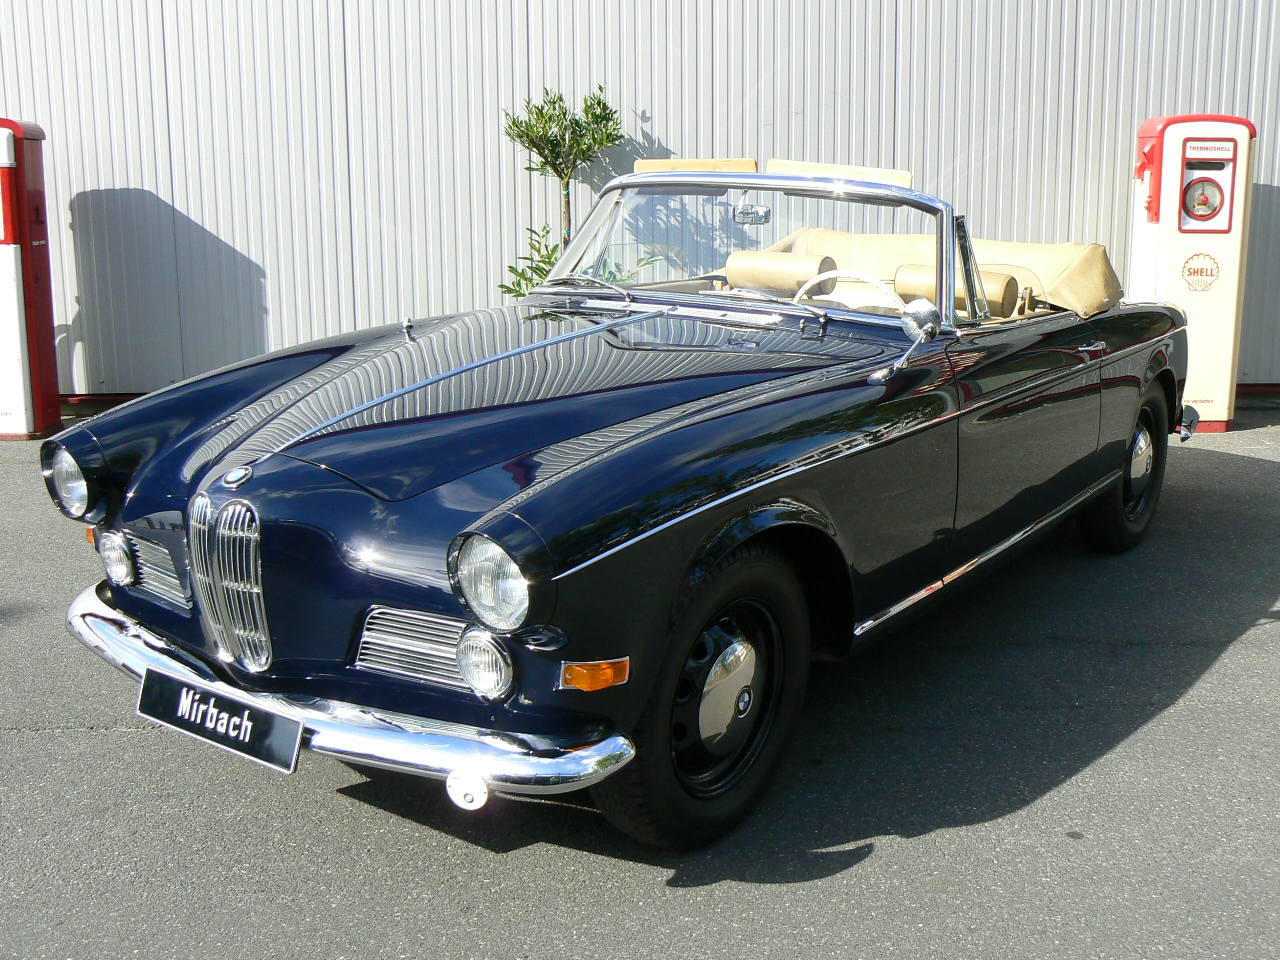 BMW 503 Cabriolet picture # 55296 | BMW photo gallery | CarsBase.